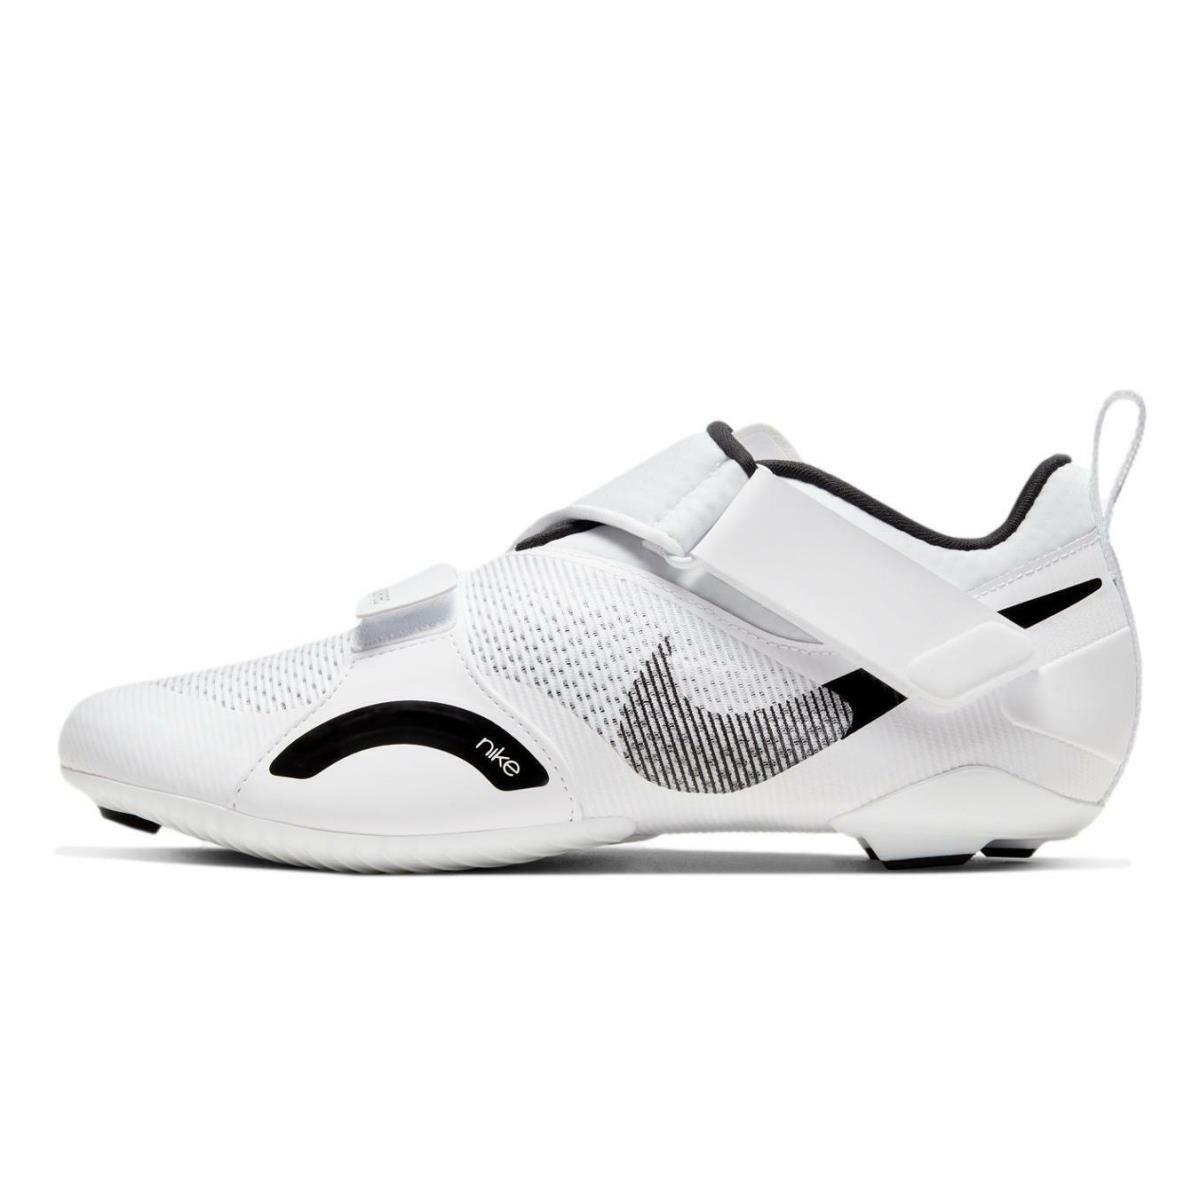 Nike shoes SuperRep Cycle - White 0